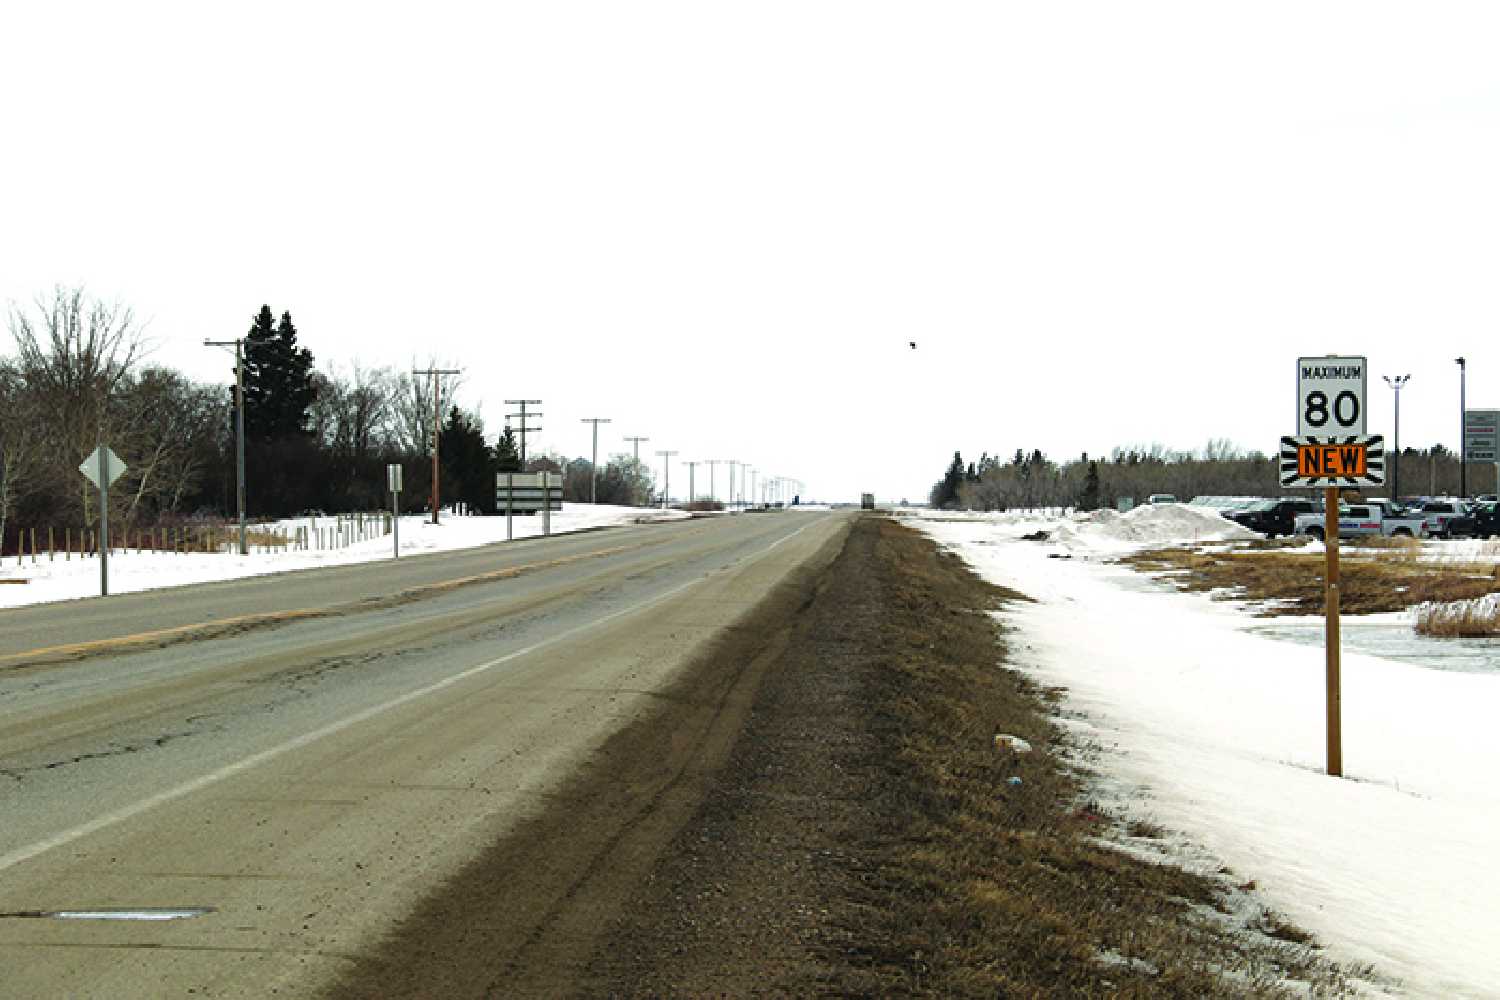 Highway 8 north of Moosomin showing a sign with a reduced speed of 80 km/hr. The speed on the highway was reduced due to safety concerns based on the condition of the road.